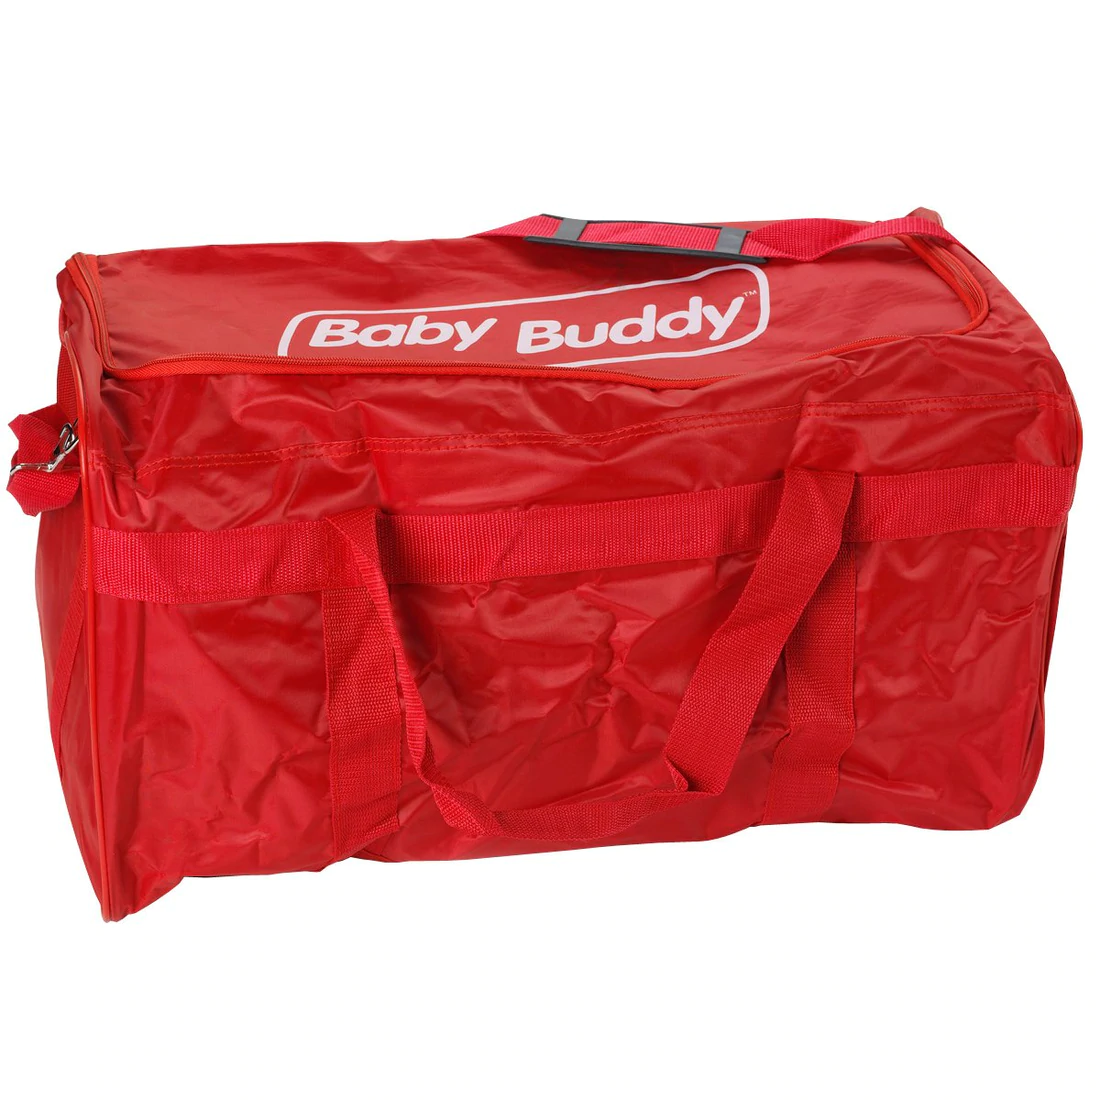 Baby Buddy Carry Bag Only | 5 pack | Nasco | Available from LivCor Australia